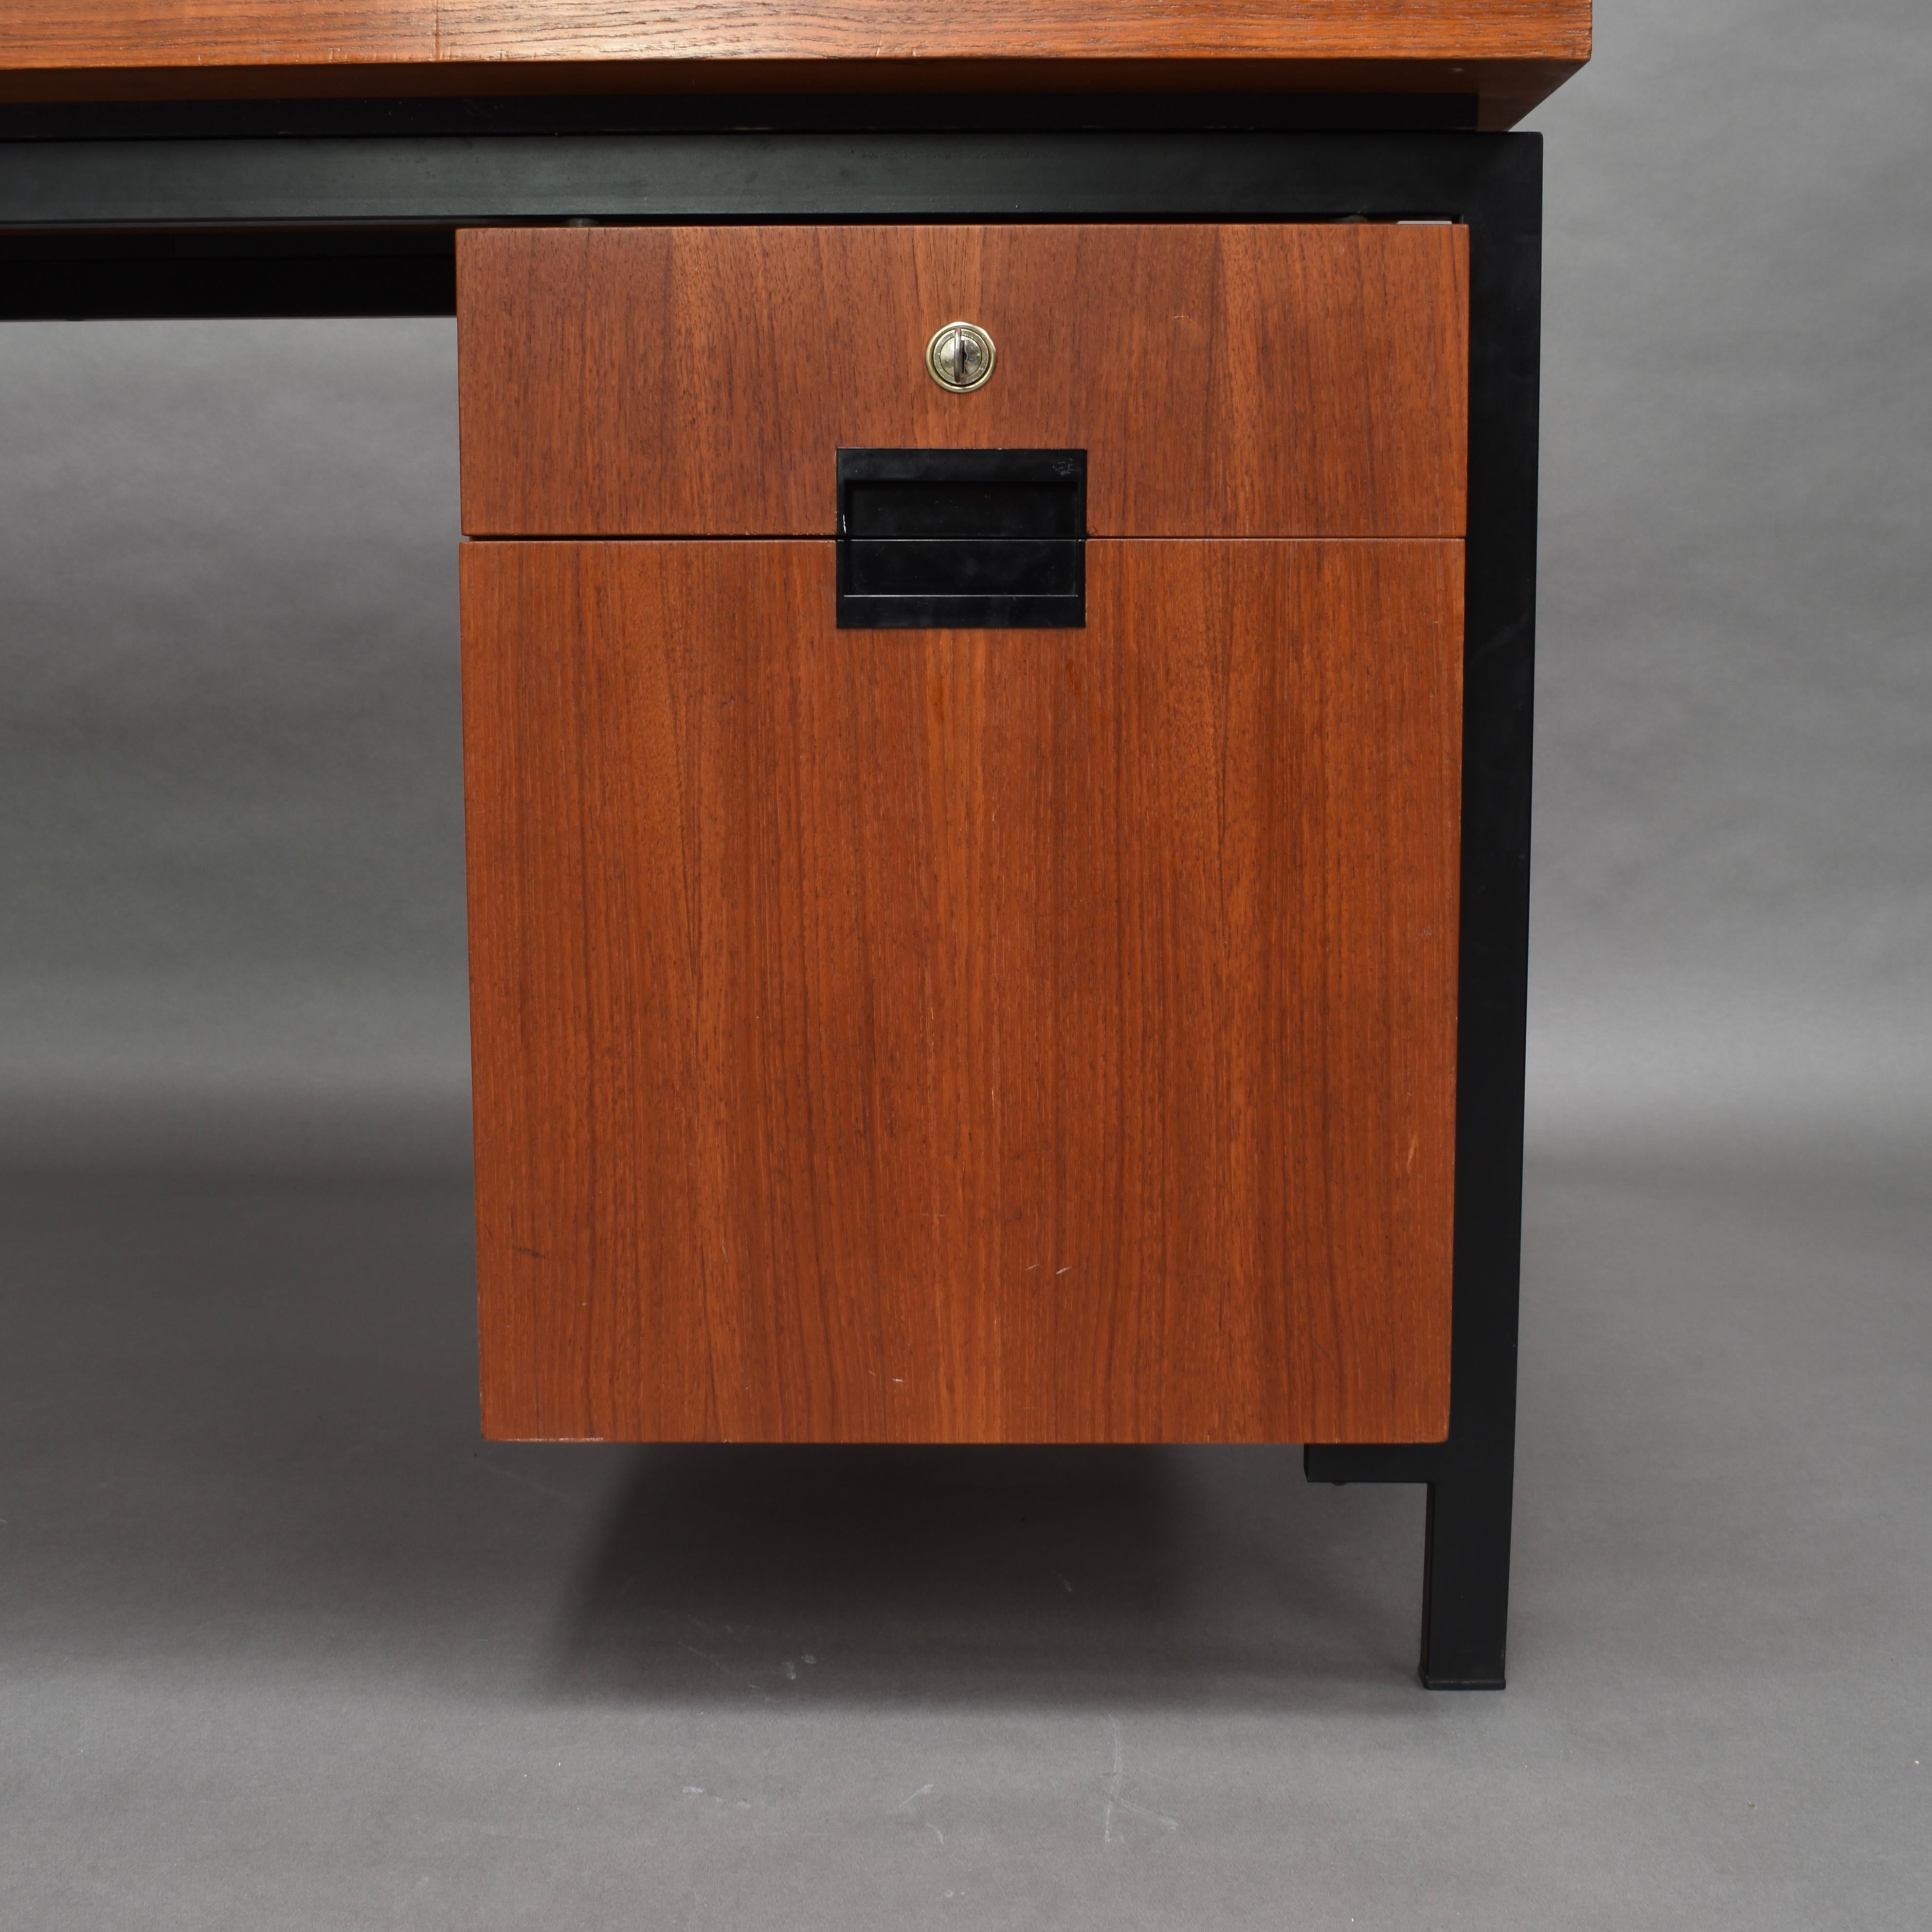 Cees Braakman for Pastoe Model EU02 Japanese Series Desk and Chair in Teak, 1950 For Sale 4